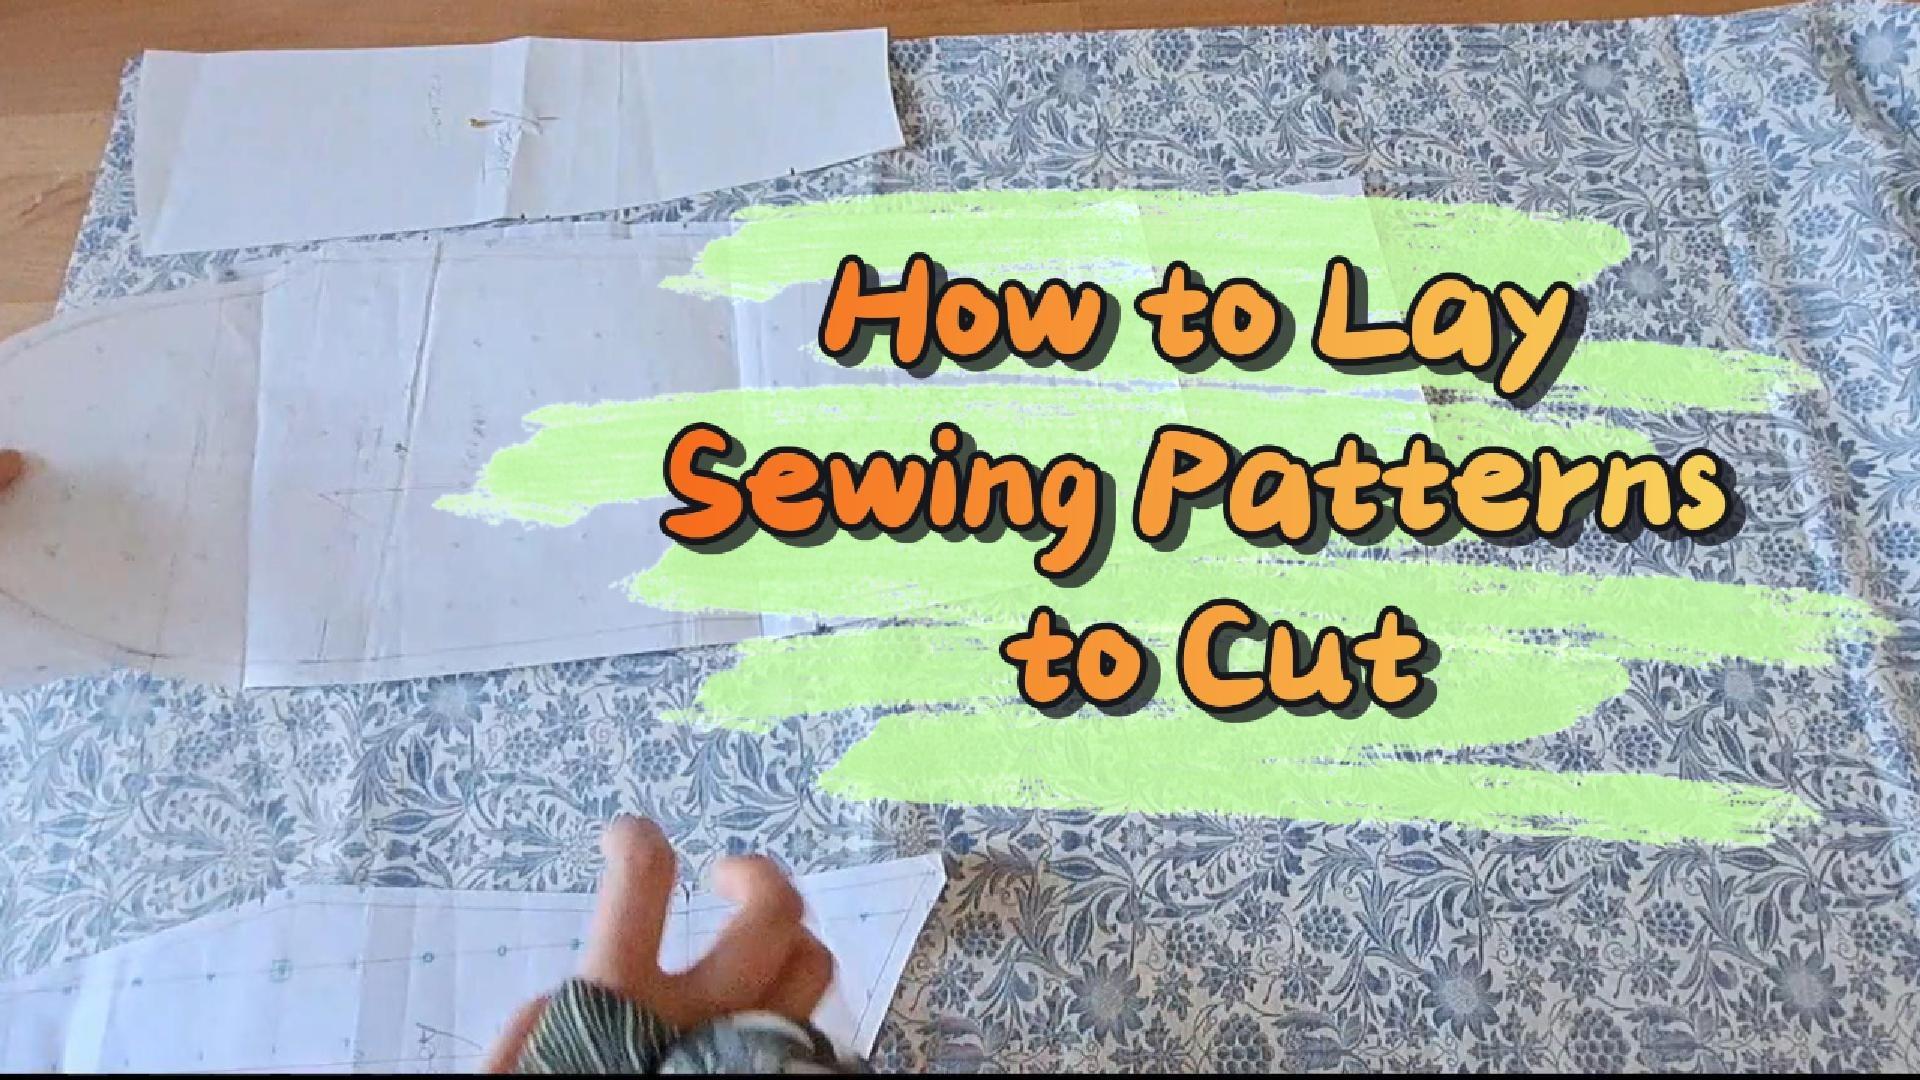 Correctly lay out sewing patterns on fabrics